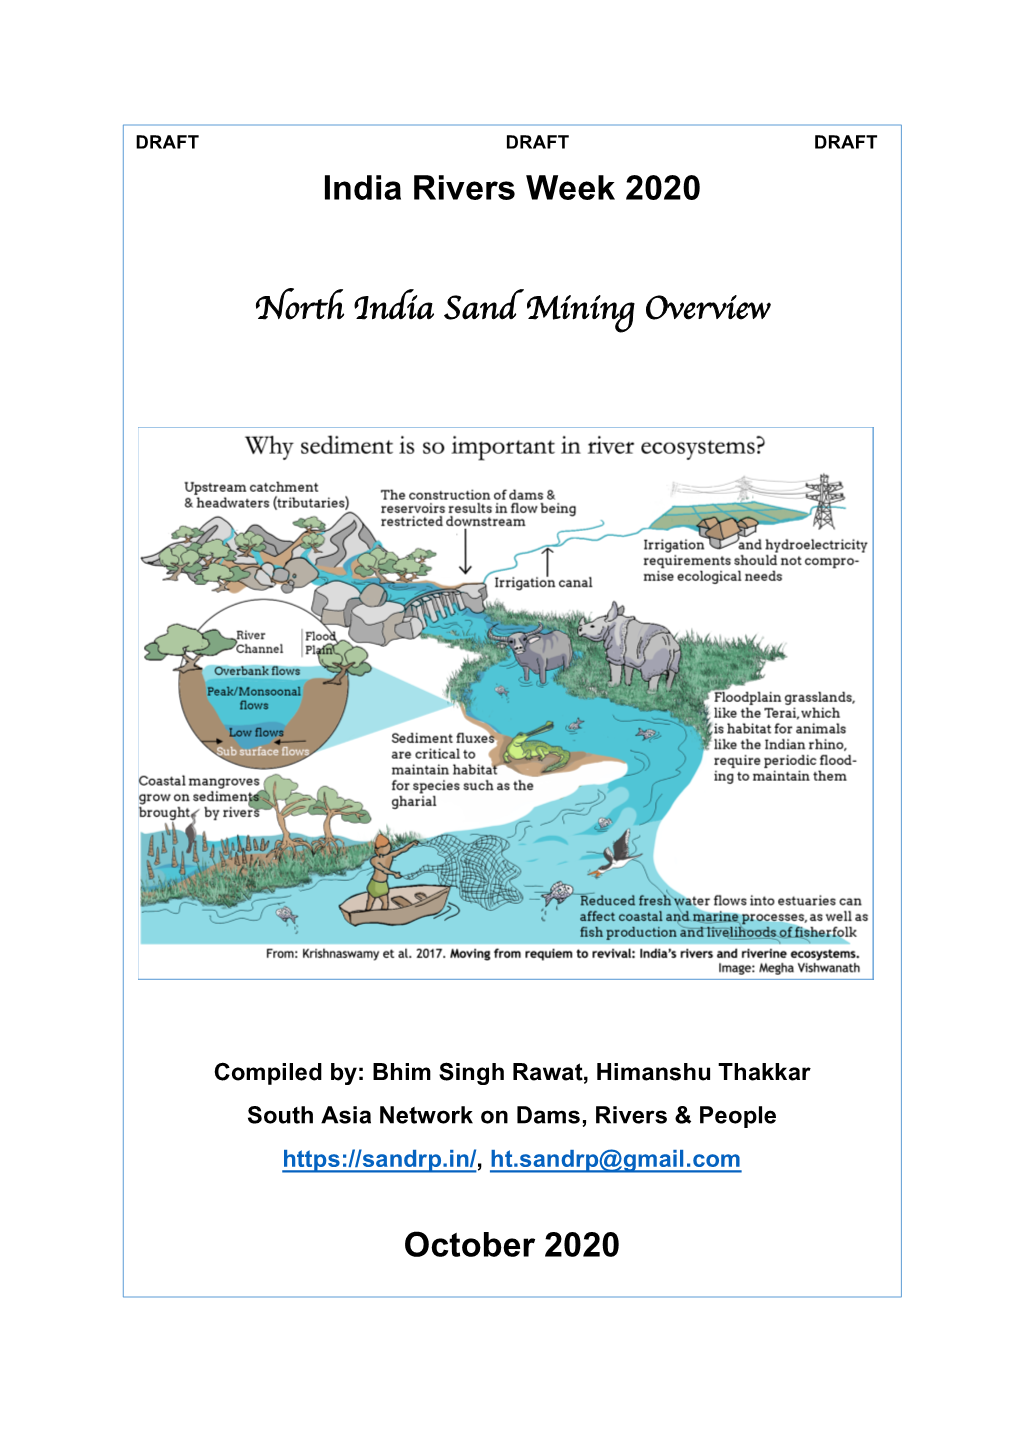 North India Sand Mining Overview